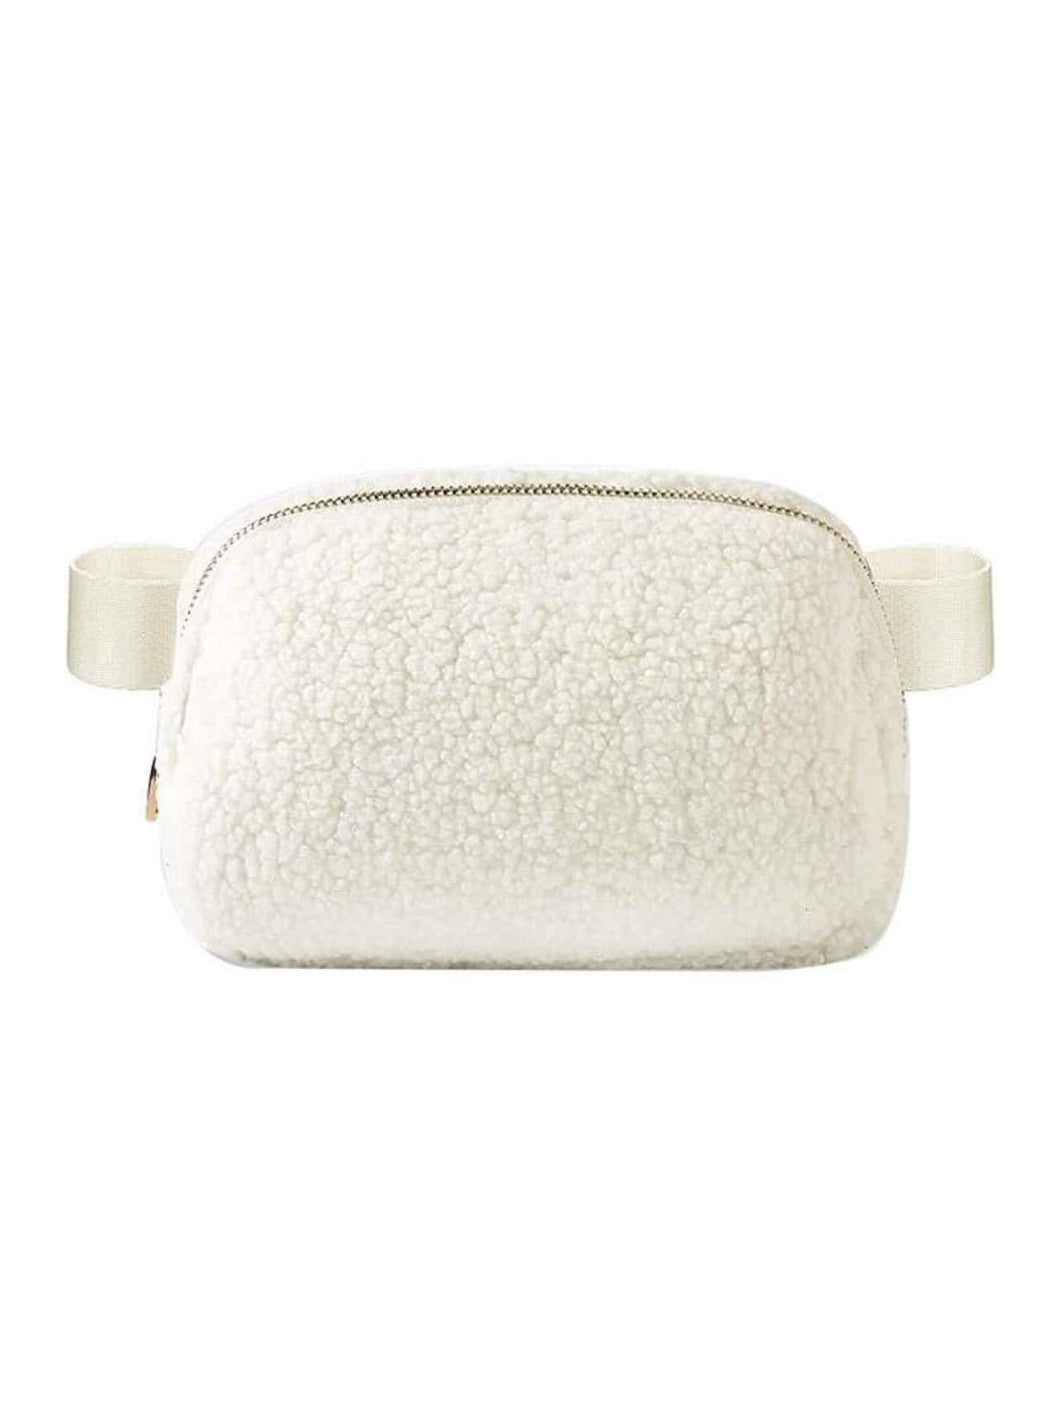 THE TEDDY SHERPA FANNY PACK - ivory